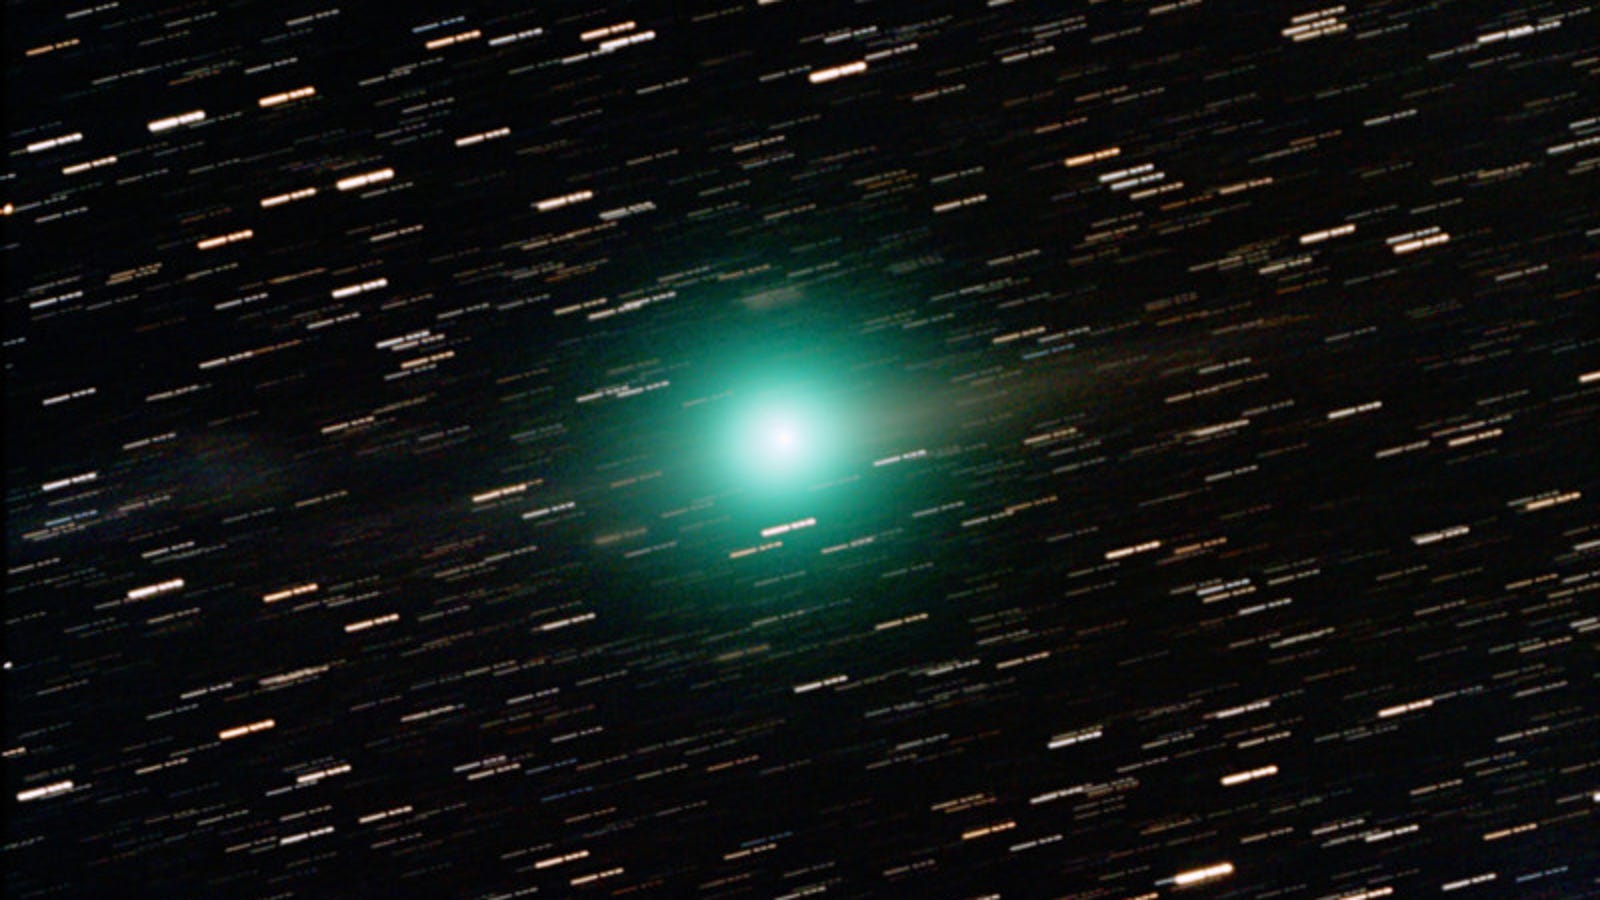 The Green Comet That's Headed Straight for Earth